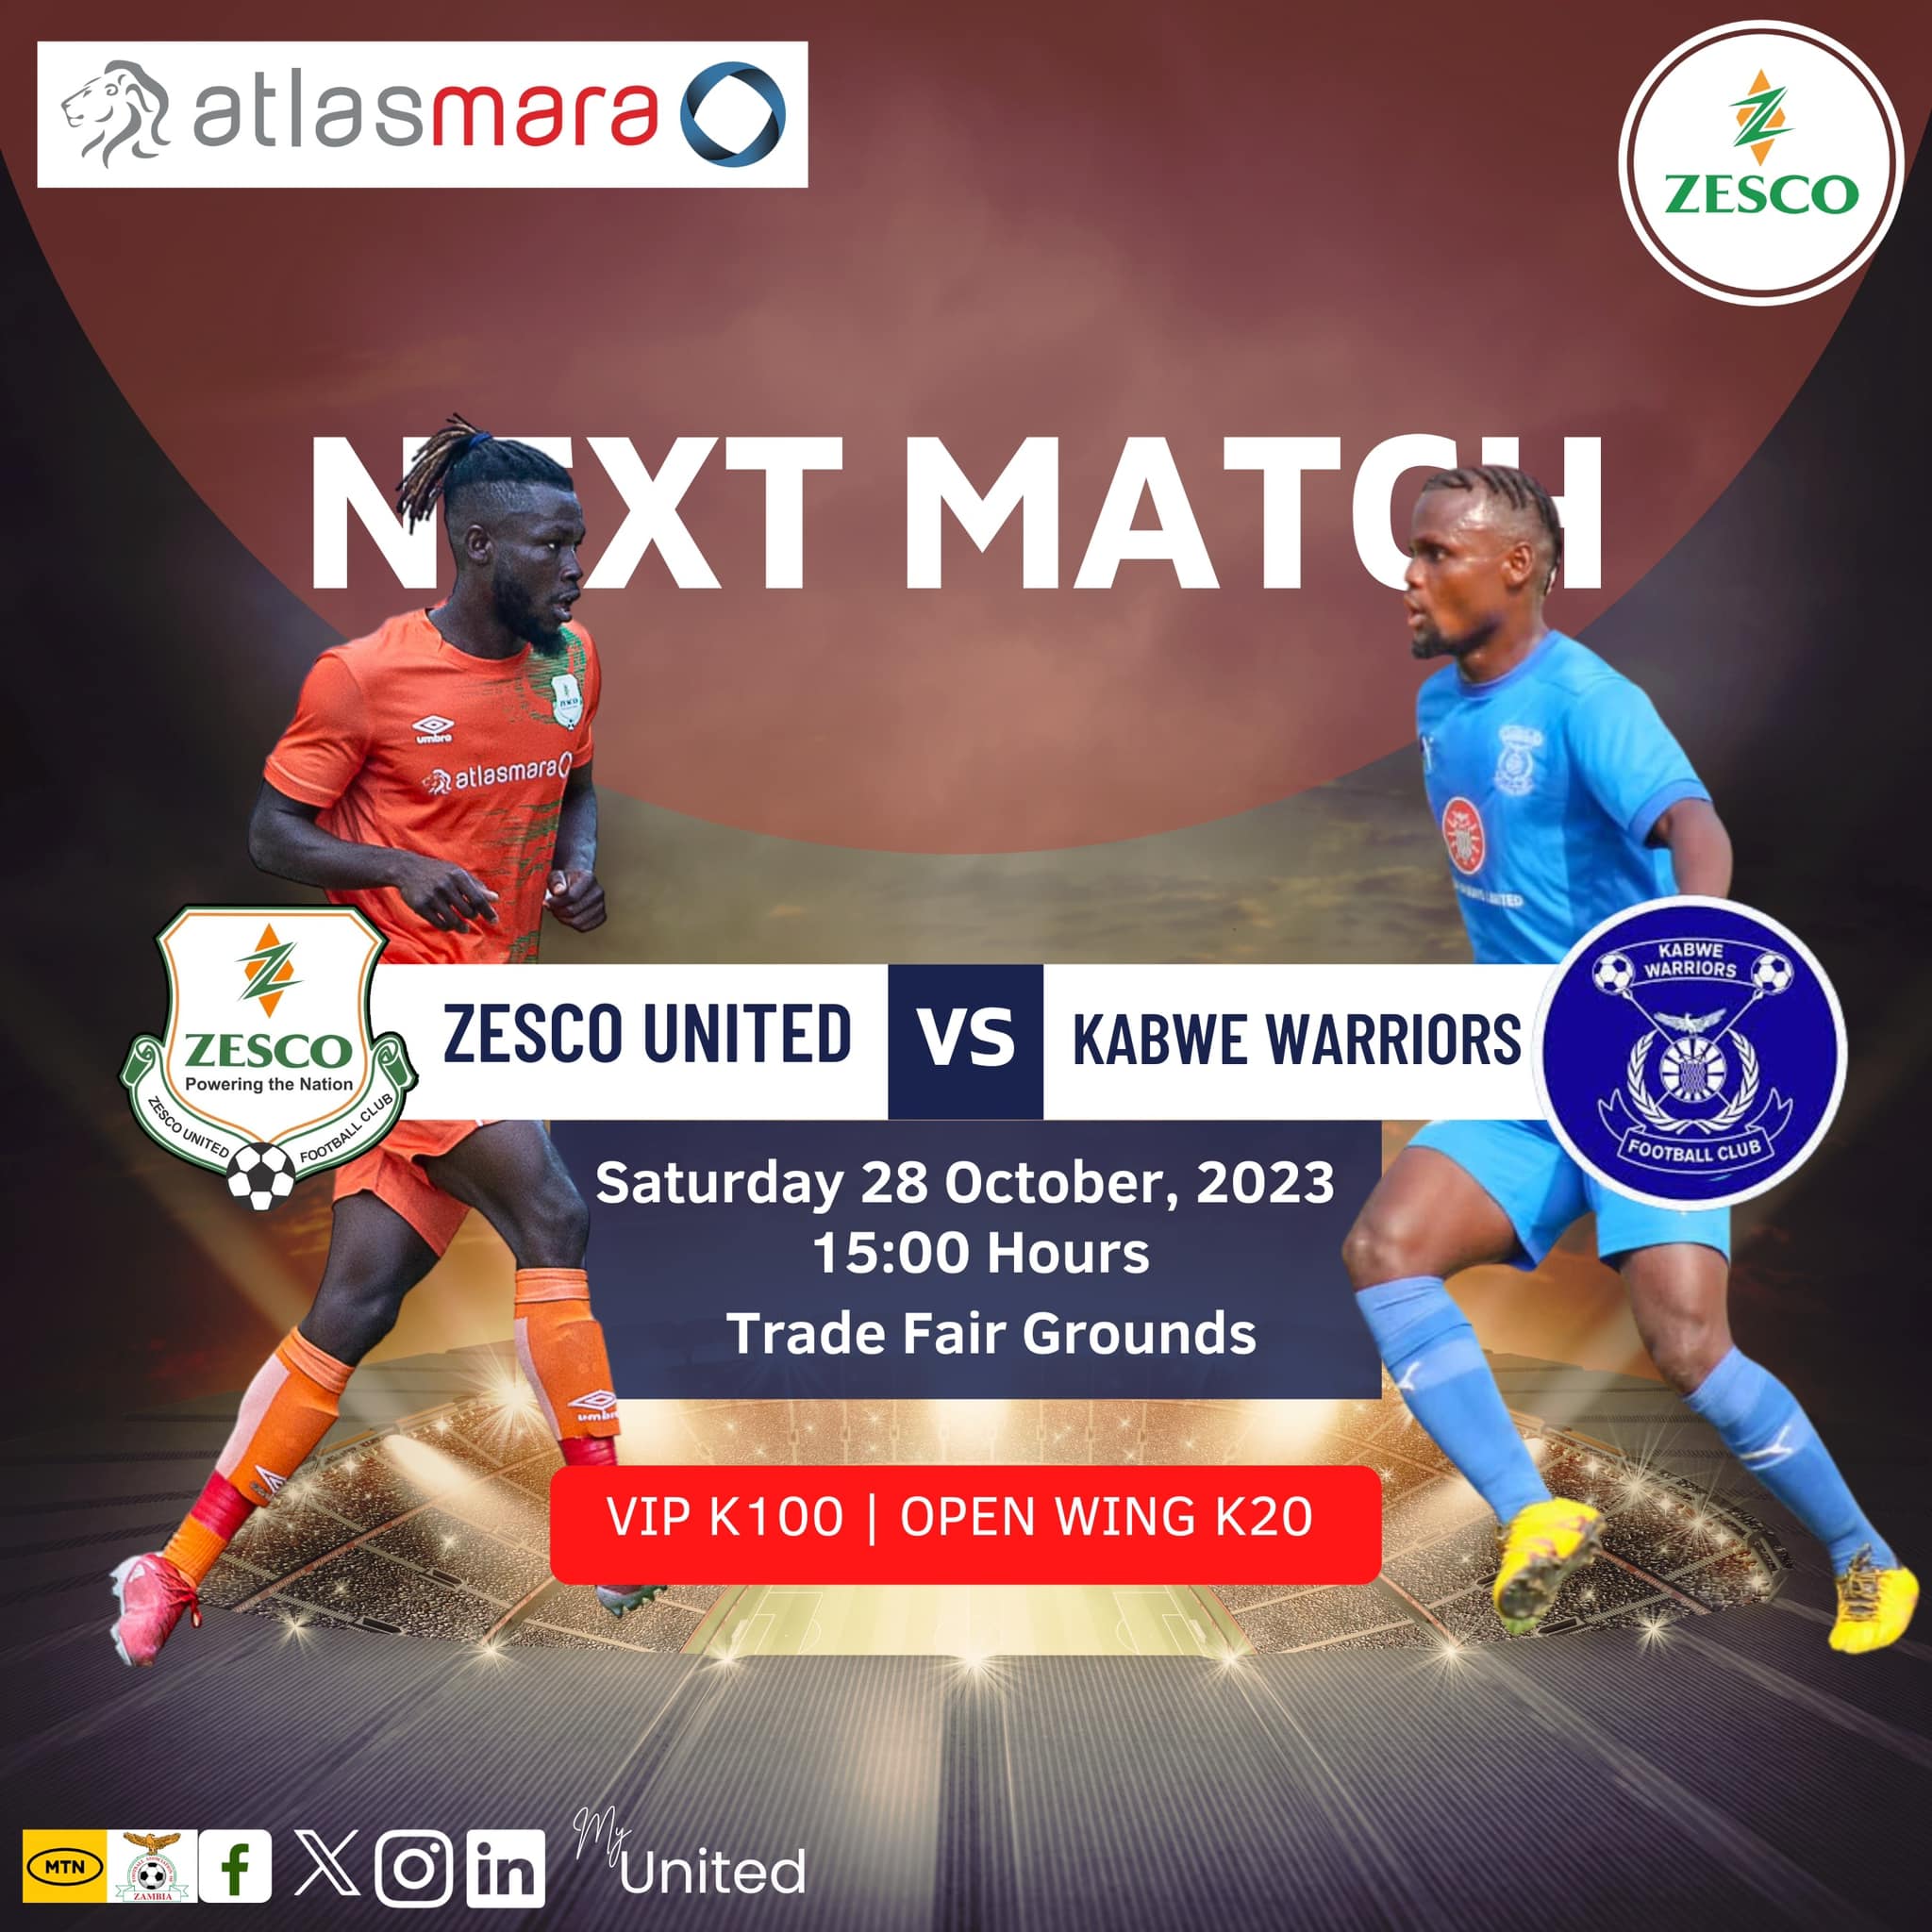 ZESCO vs. Kabwe Warriors: Clash of Titans Looms in High-Stakes Showdown at Trade Fair Grounds